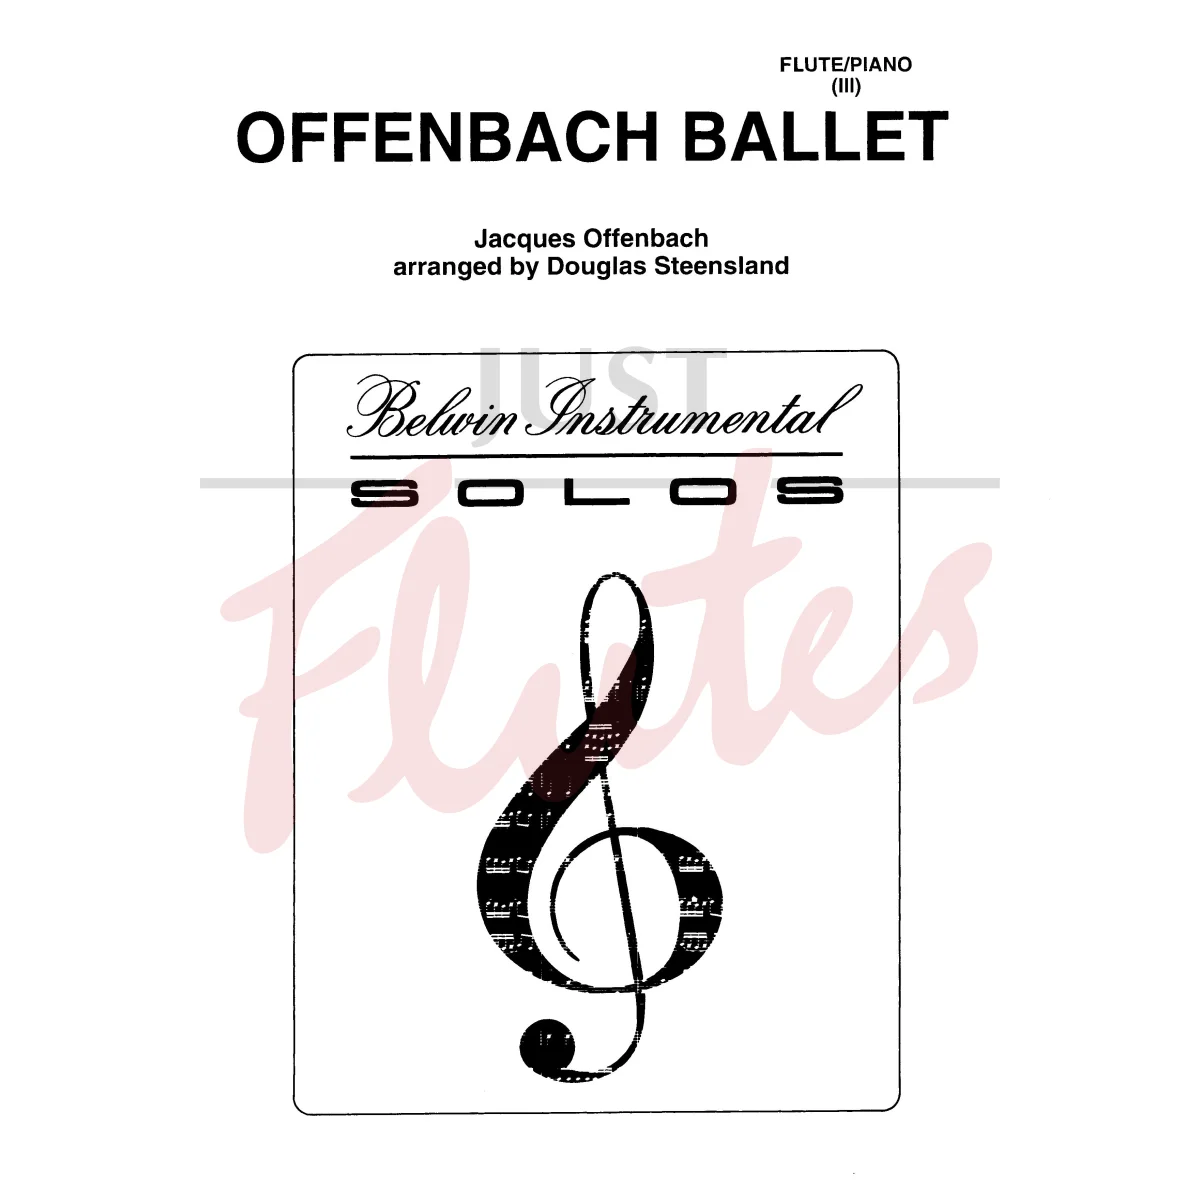 Offenbach Ballet for Flute and Piano